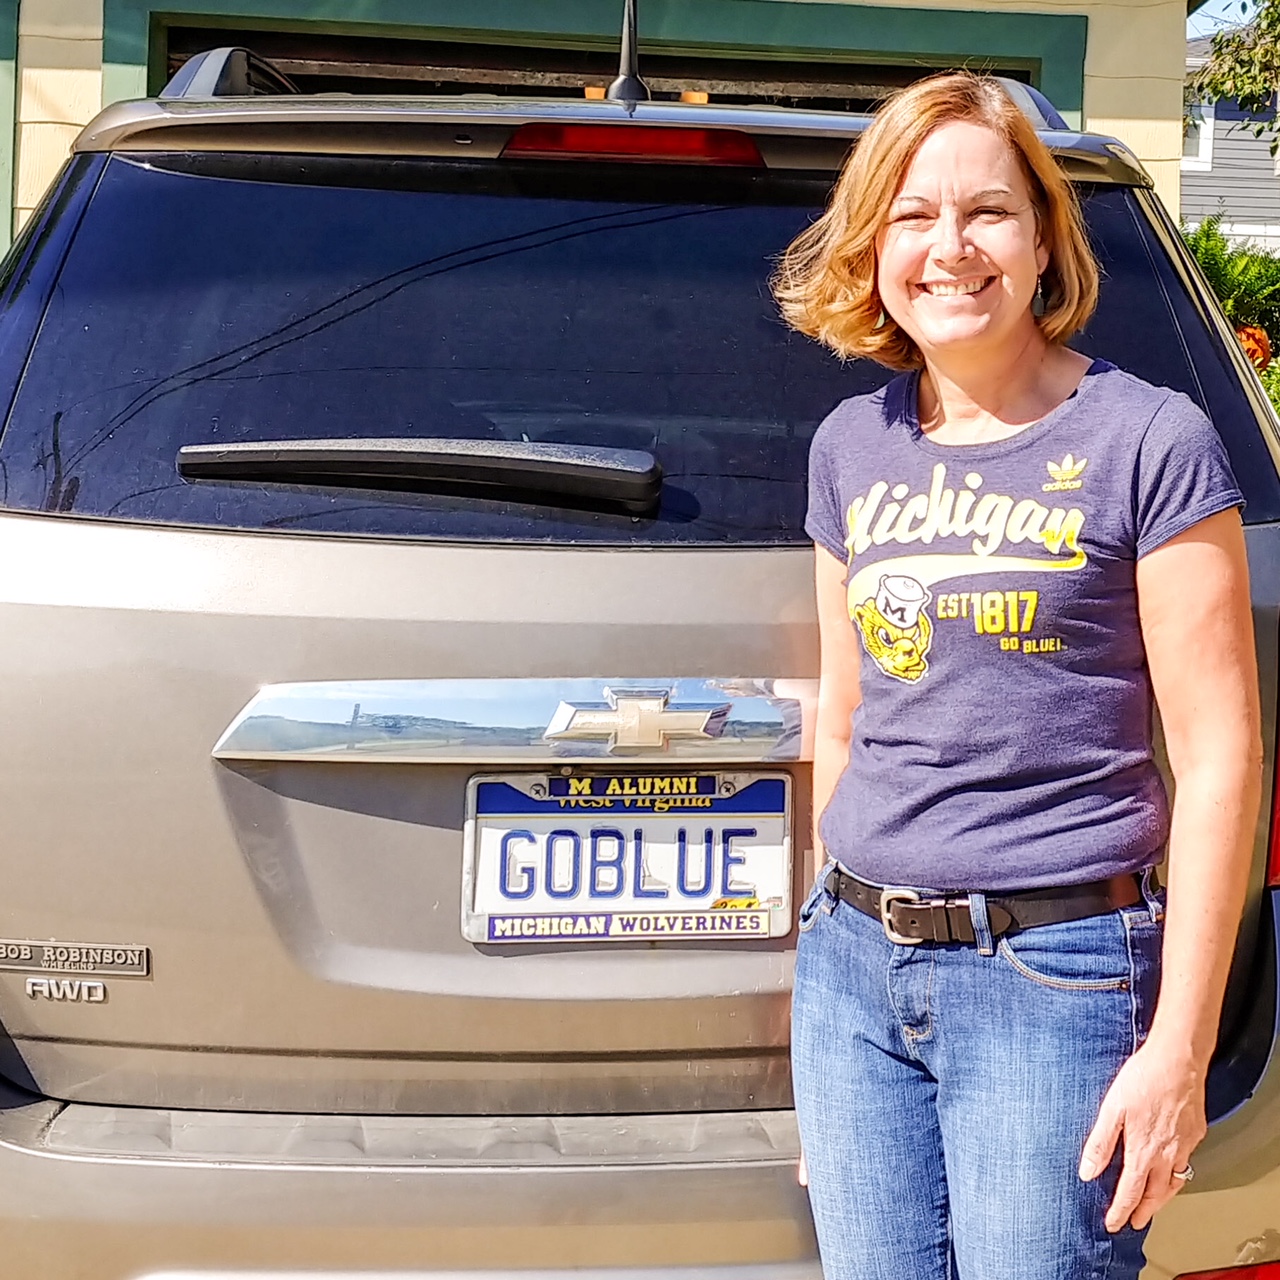 Linda MacKenzie Homstrand, ’85, and her husband, Jeff Homstrand, ‘84, JD ‘87, acquired two West Virginia plates in 1987. Soon after getting this GOBLUE plate, the couple received a notice from the city of Ann Arbor saying they owed several hundred dollars in unpaid parking tickets. Apparently, the previous owner of the GOBLUE West Virginia plate had lived in Ann Arbor. After explaining that they did not own the plate during that period, they received a very nice exonerating letter from the city wishing them well. It was signed “Go Blue!”